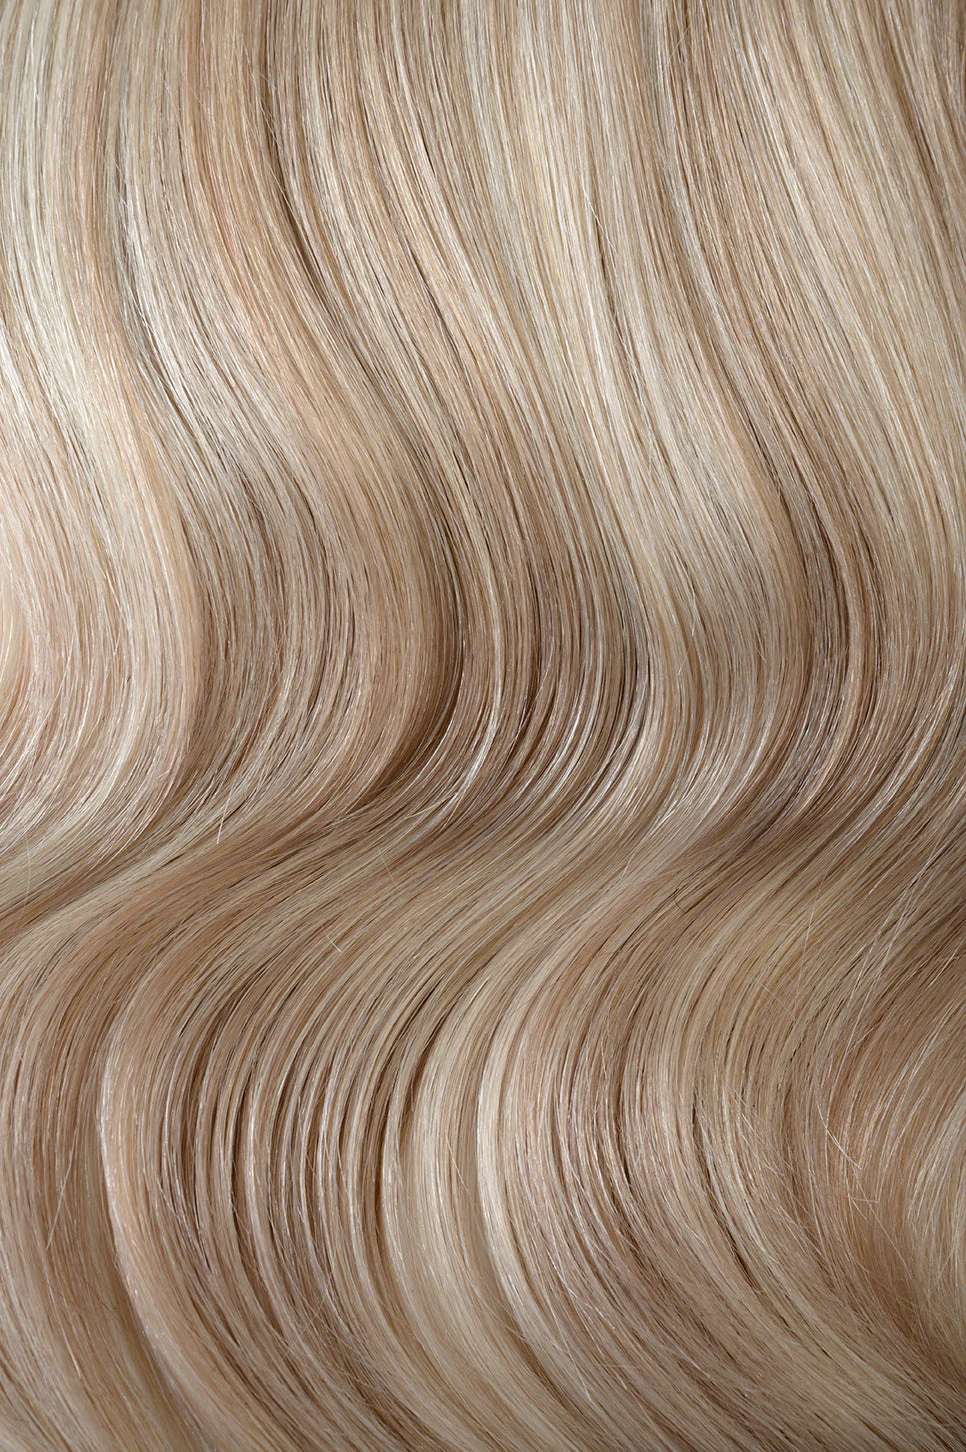 #18/613 Ash Blonde Highlights Hand Tied Weft Extensions